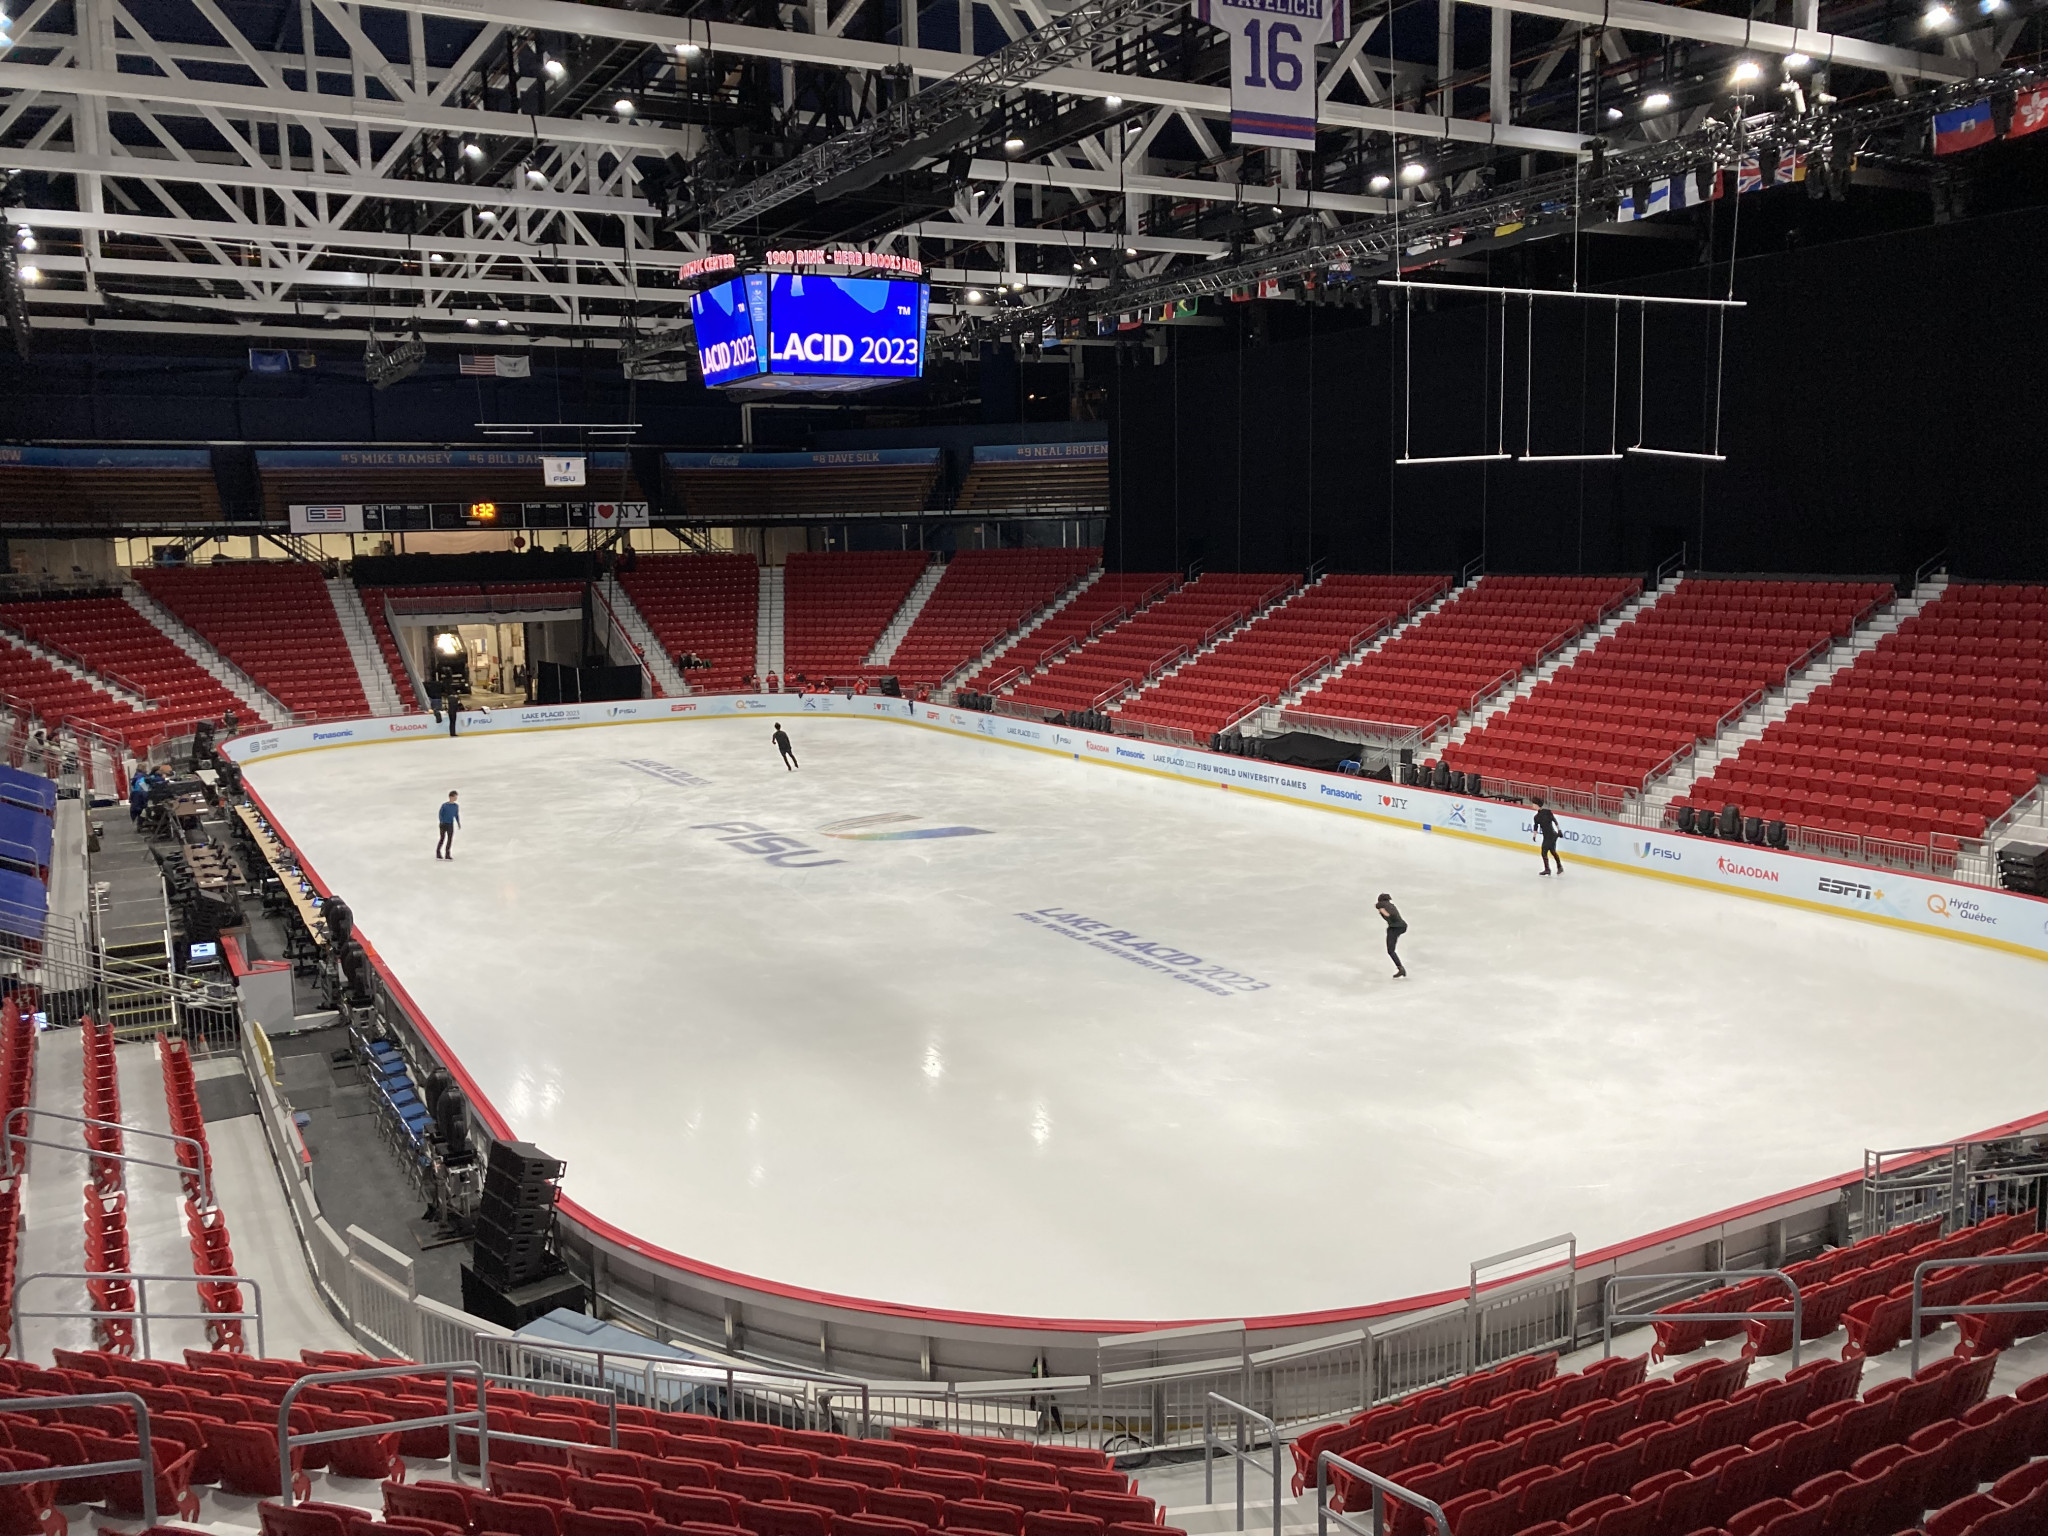 The Olympic Center was among ORDA's venues that received upgrades in time for the Lake Placid 2023 FISU Winter World University Games ©ITG